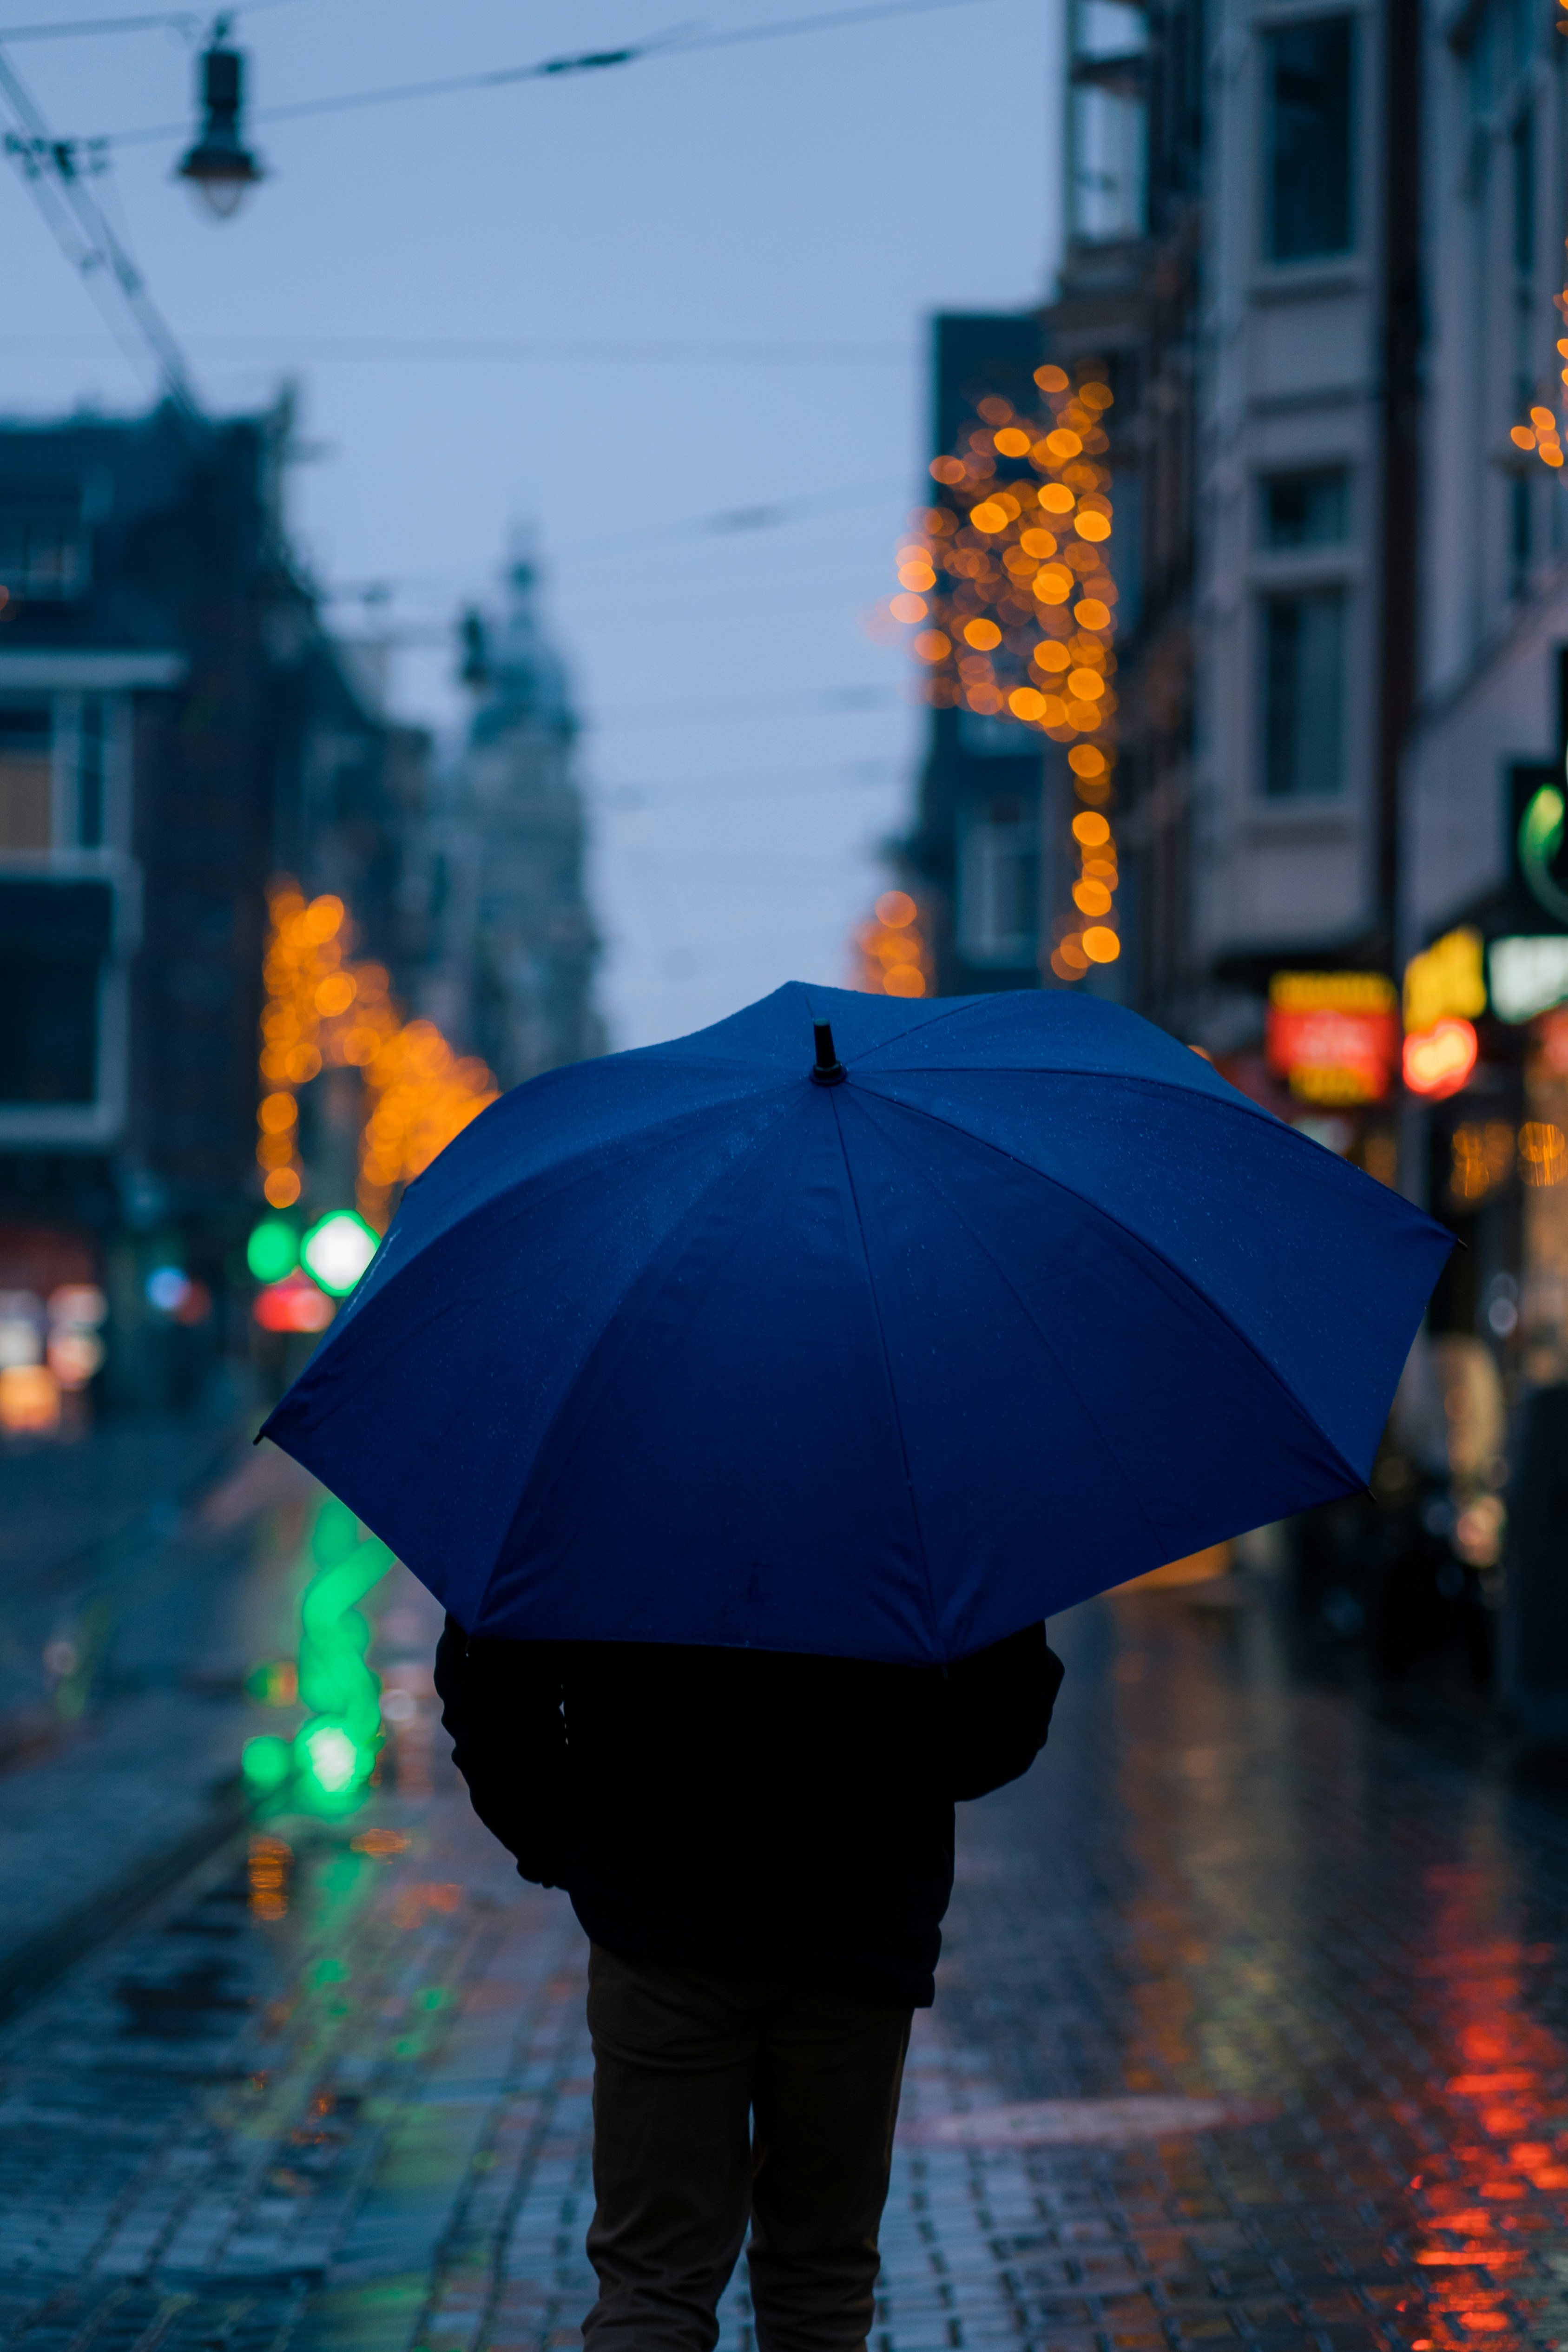 Rainy day in Amsterdam, looking for people with umbrella's. Shot on the Sony A7III with the 85mm F1.8.